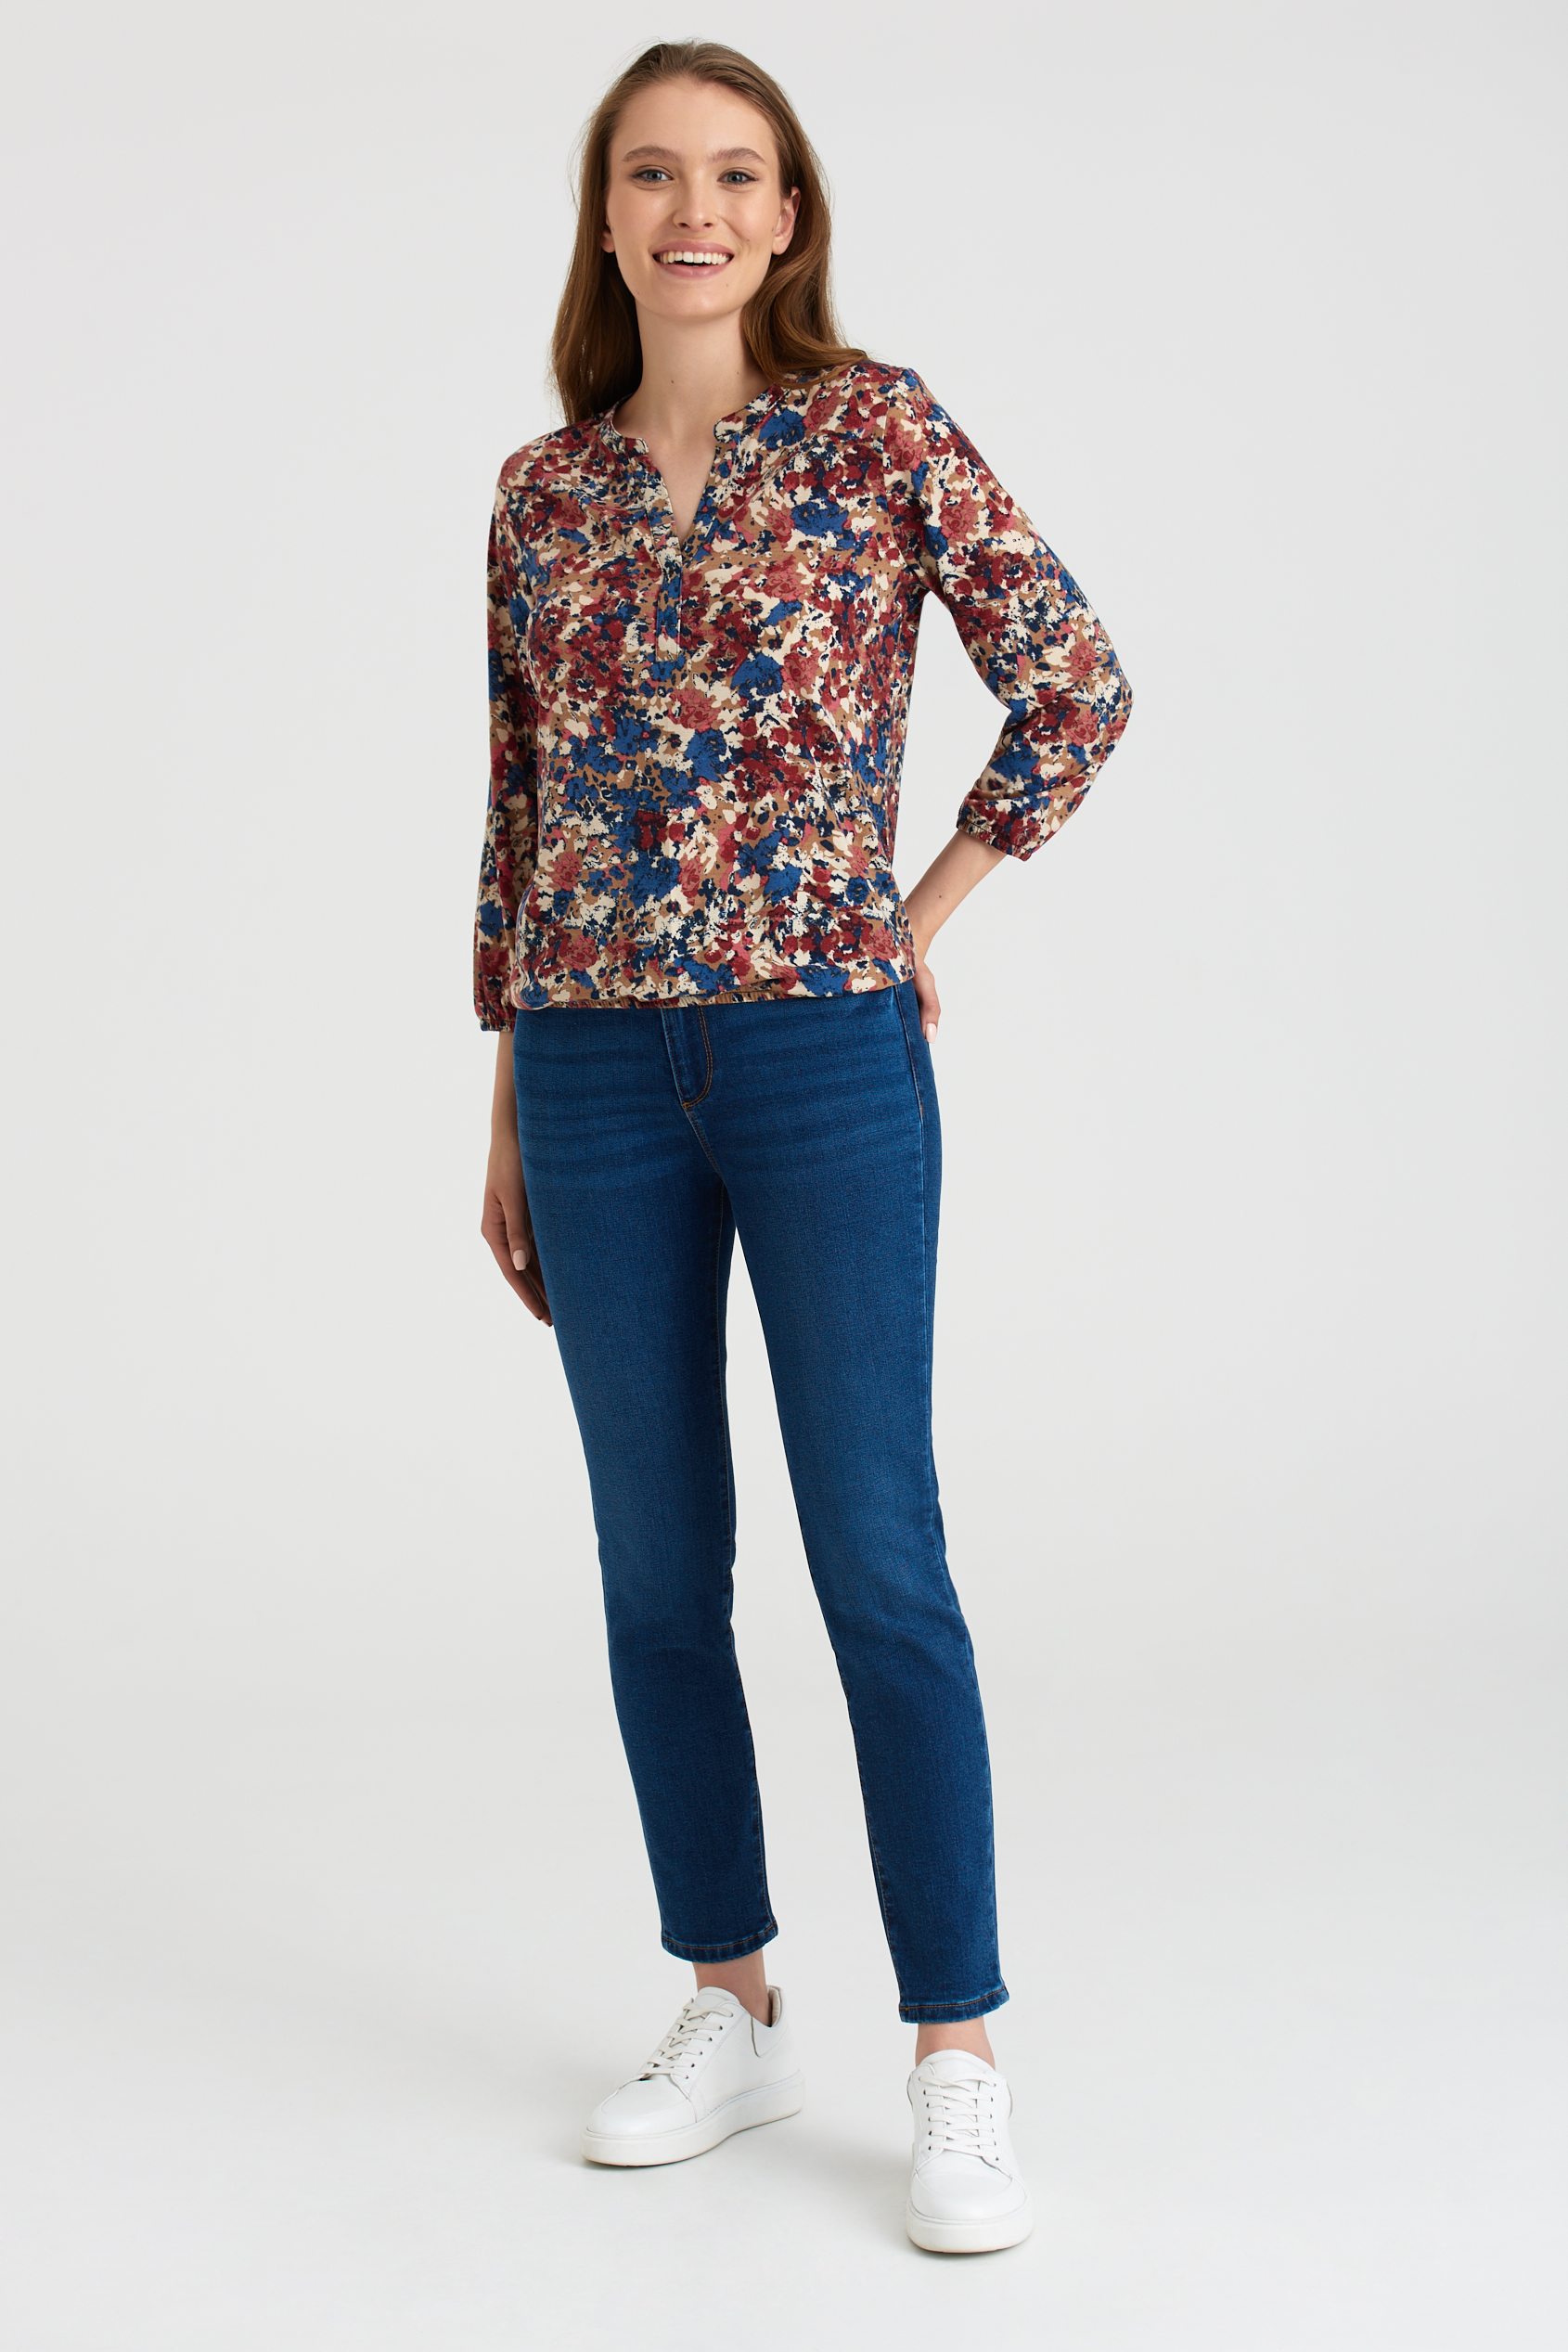 Greenpoint Woman's Blouse TOP726W22MDW02